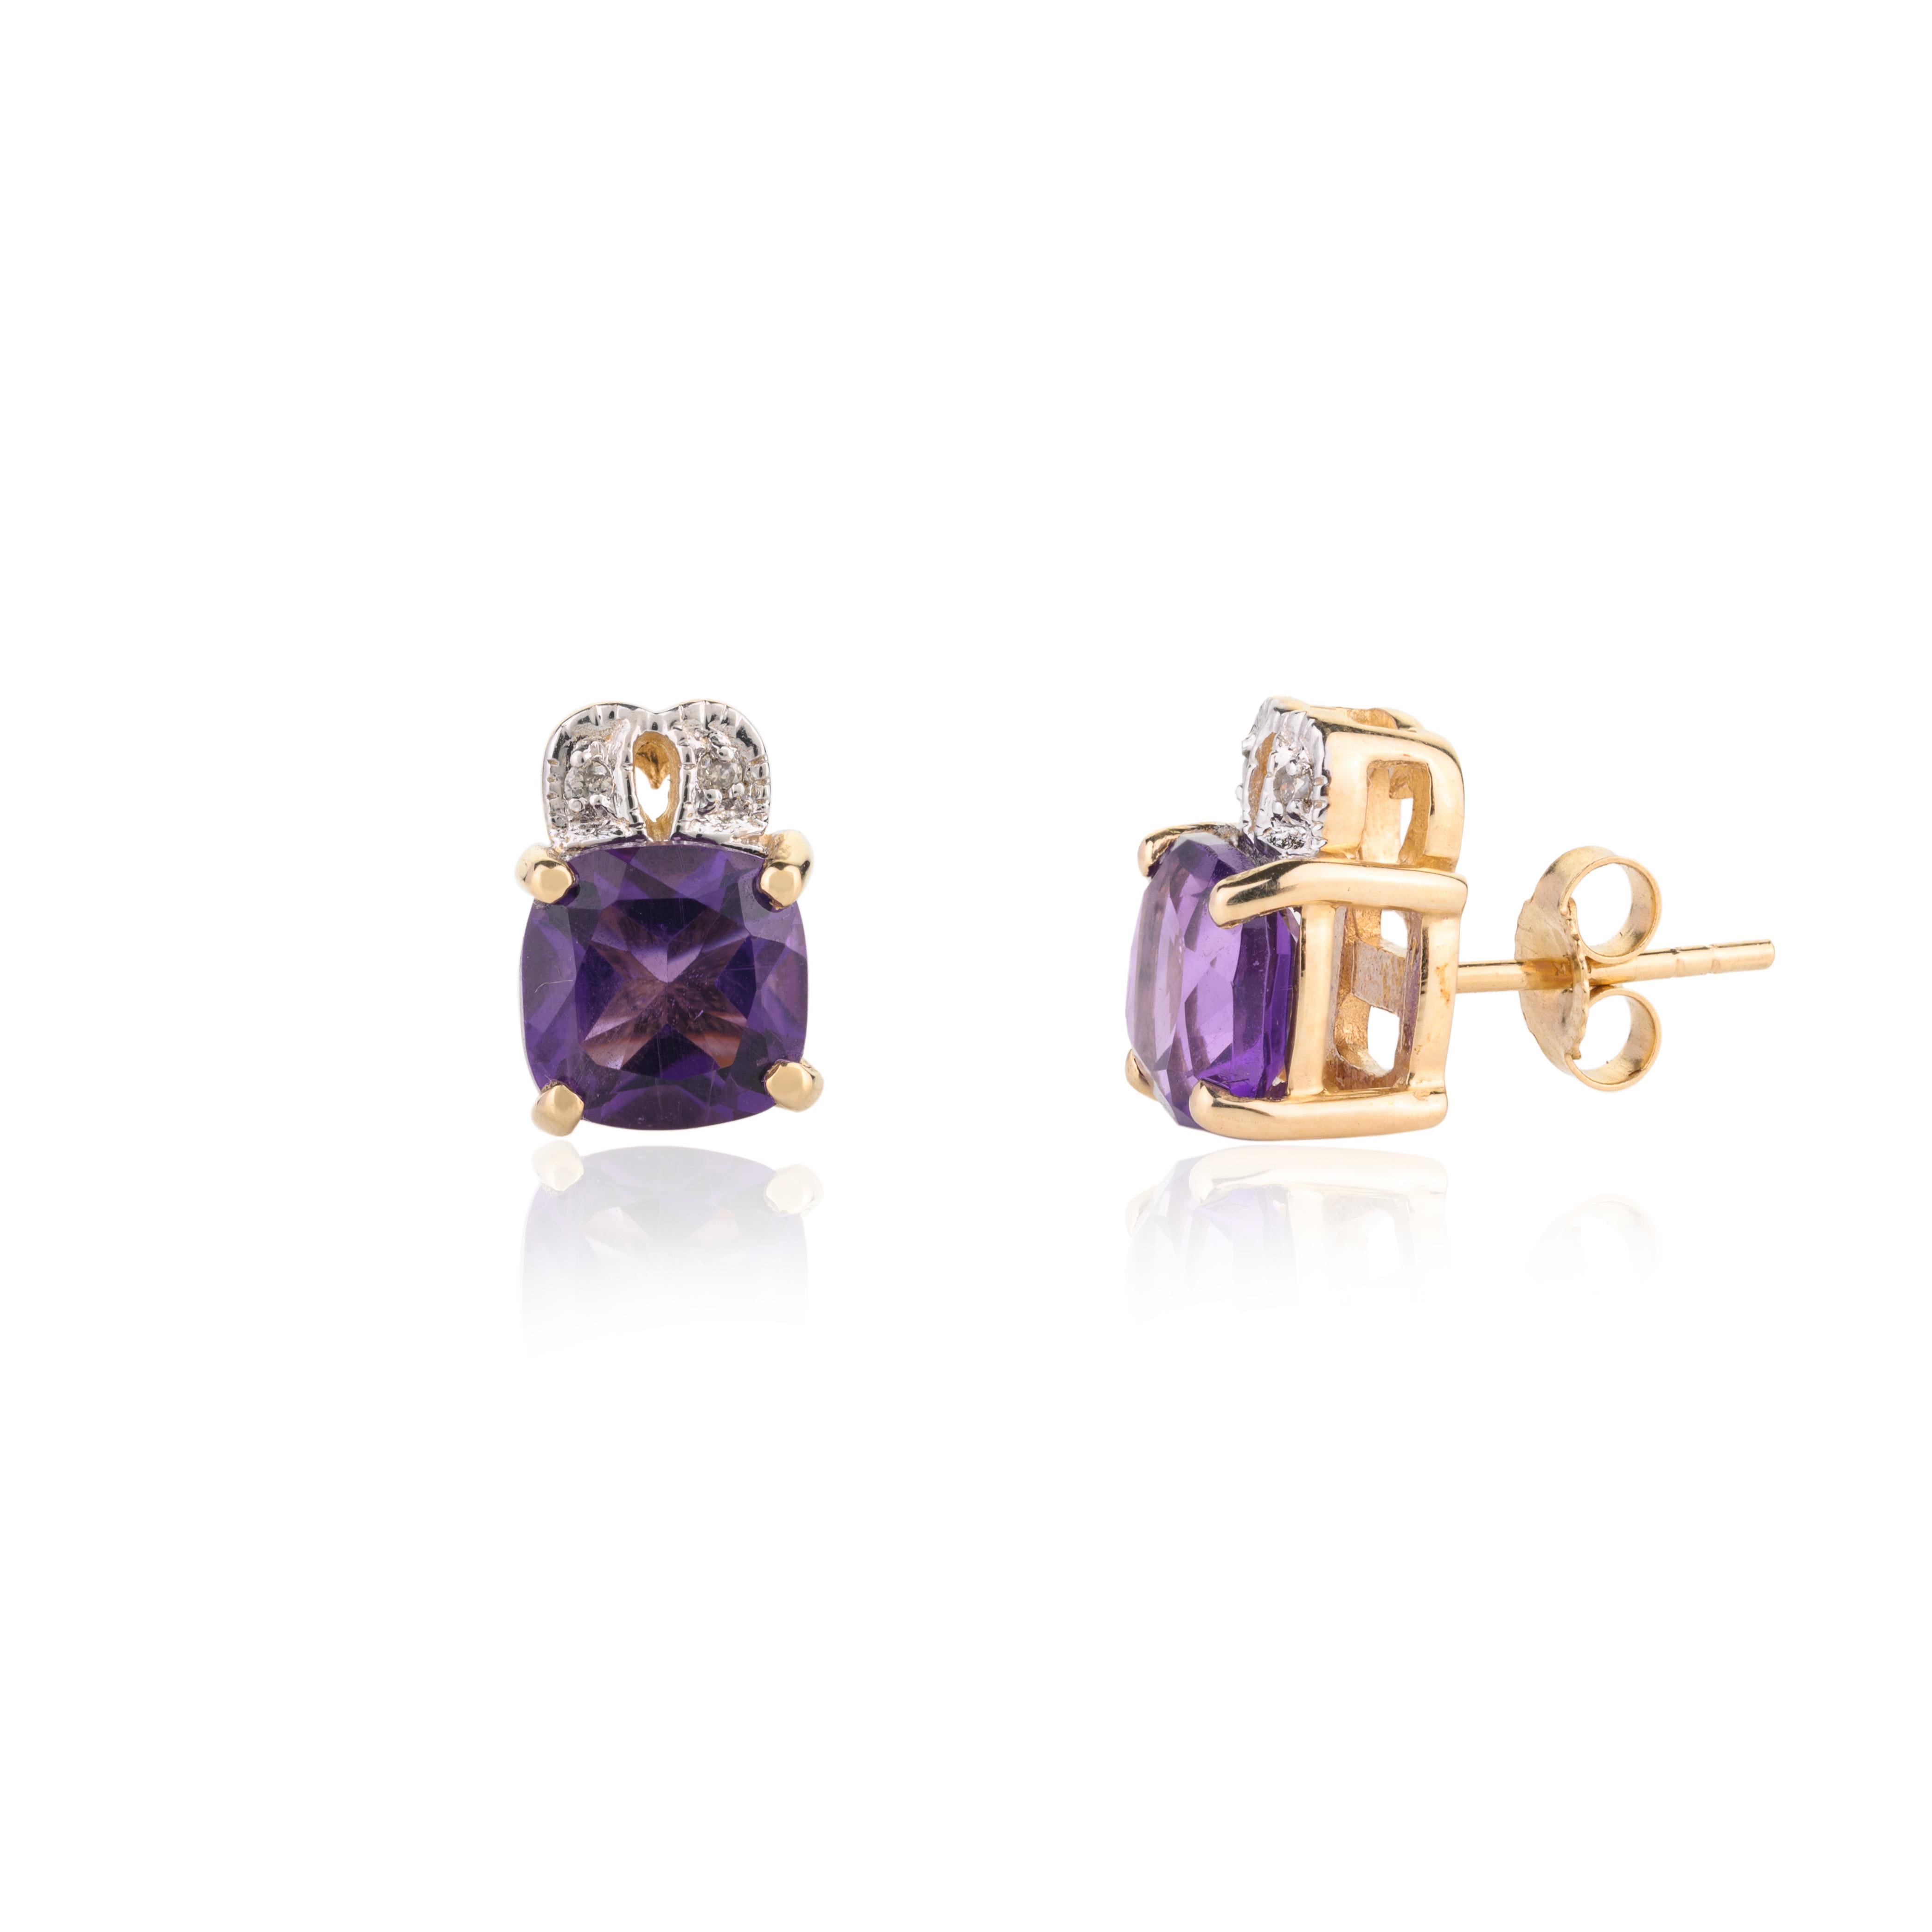 Natural Amethyst and Diamond Stud Earrings Set in 14k Yellow Gold For Sale 1